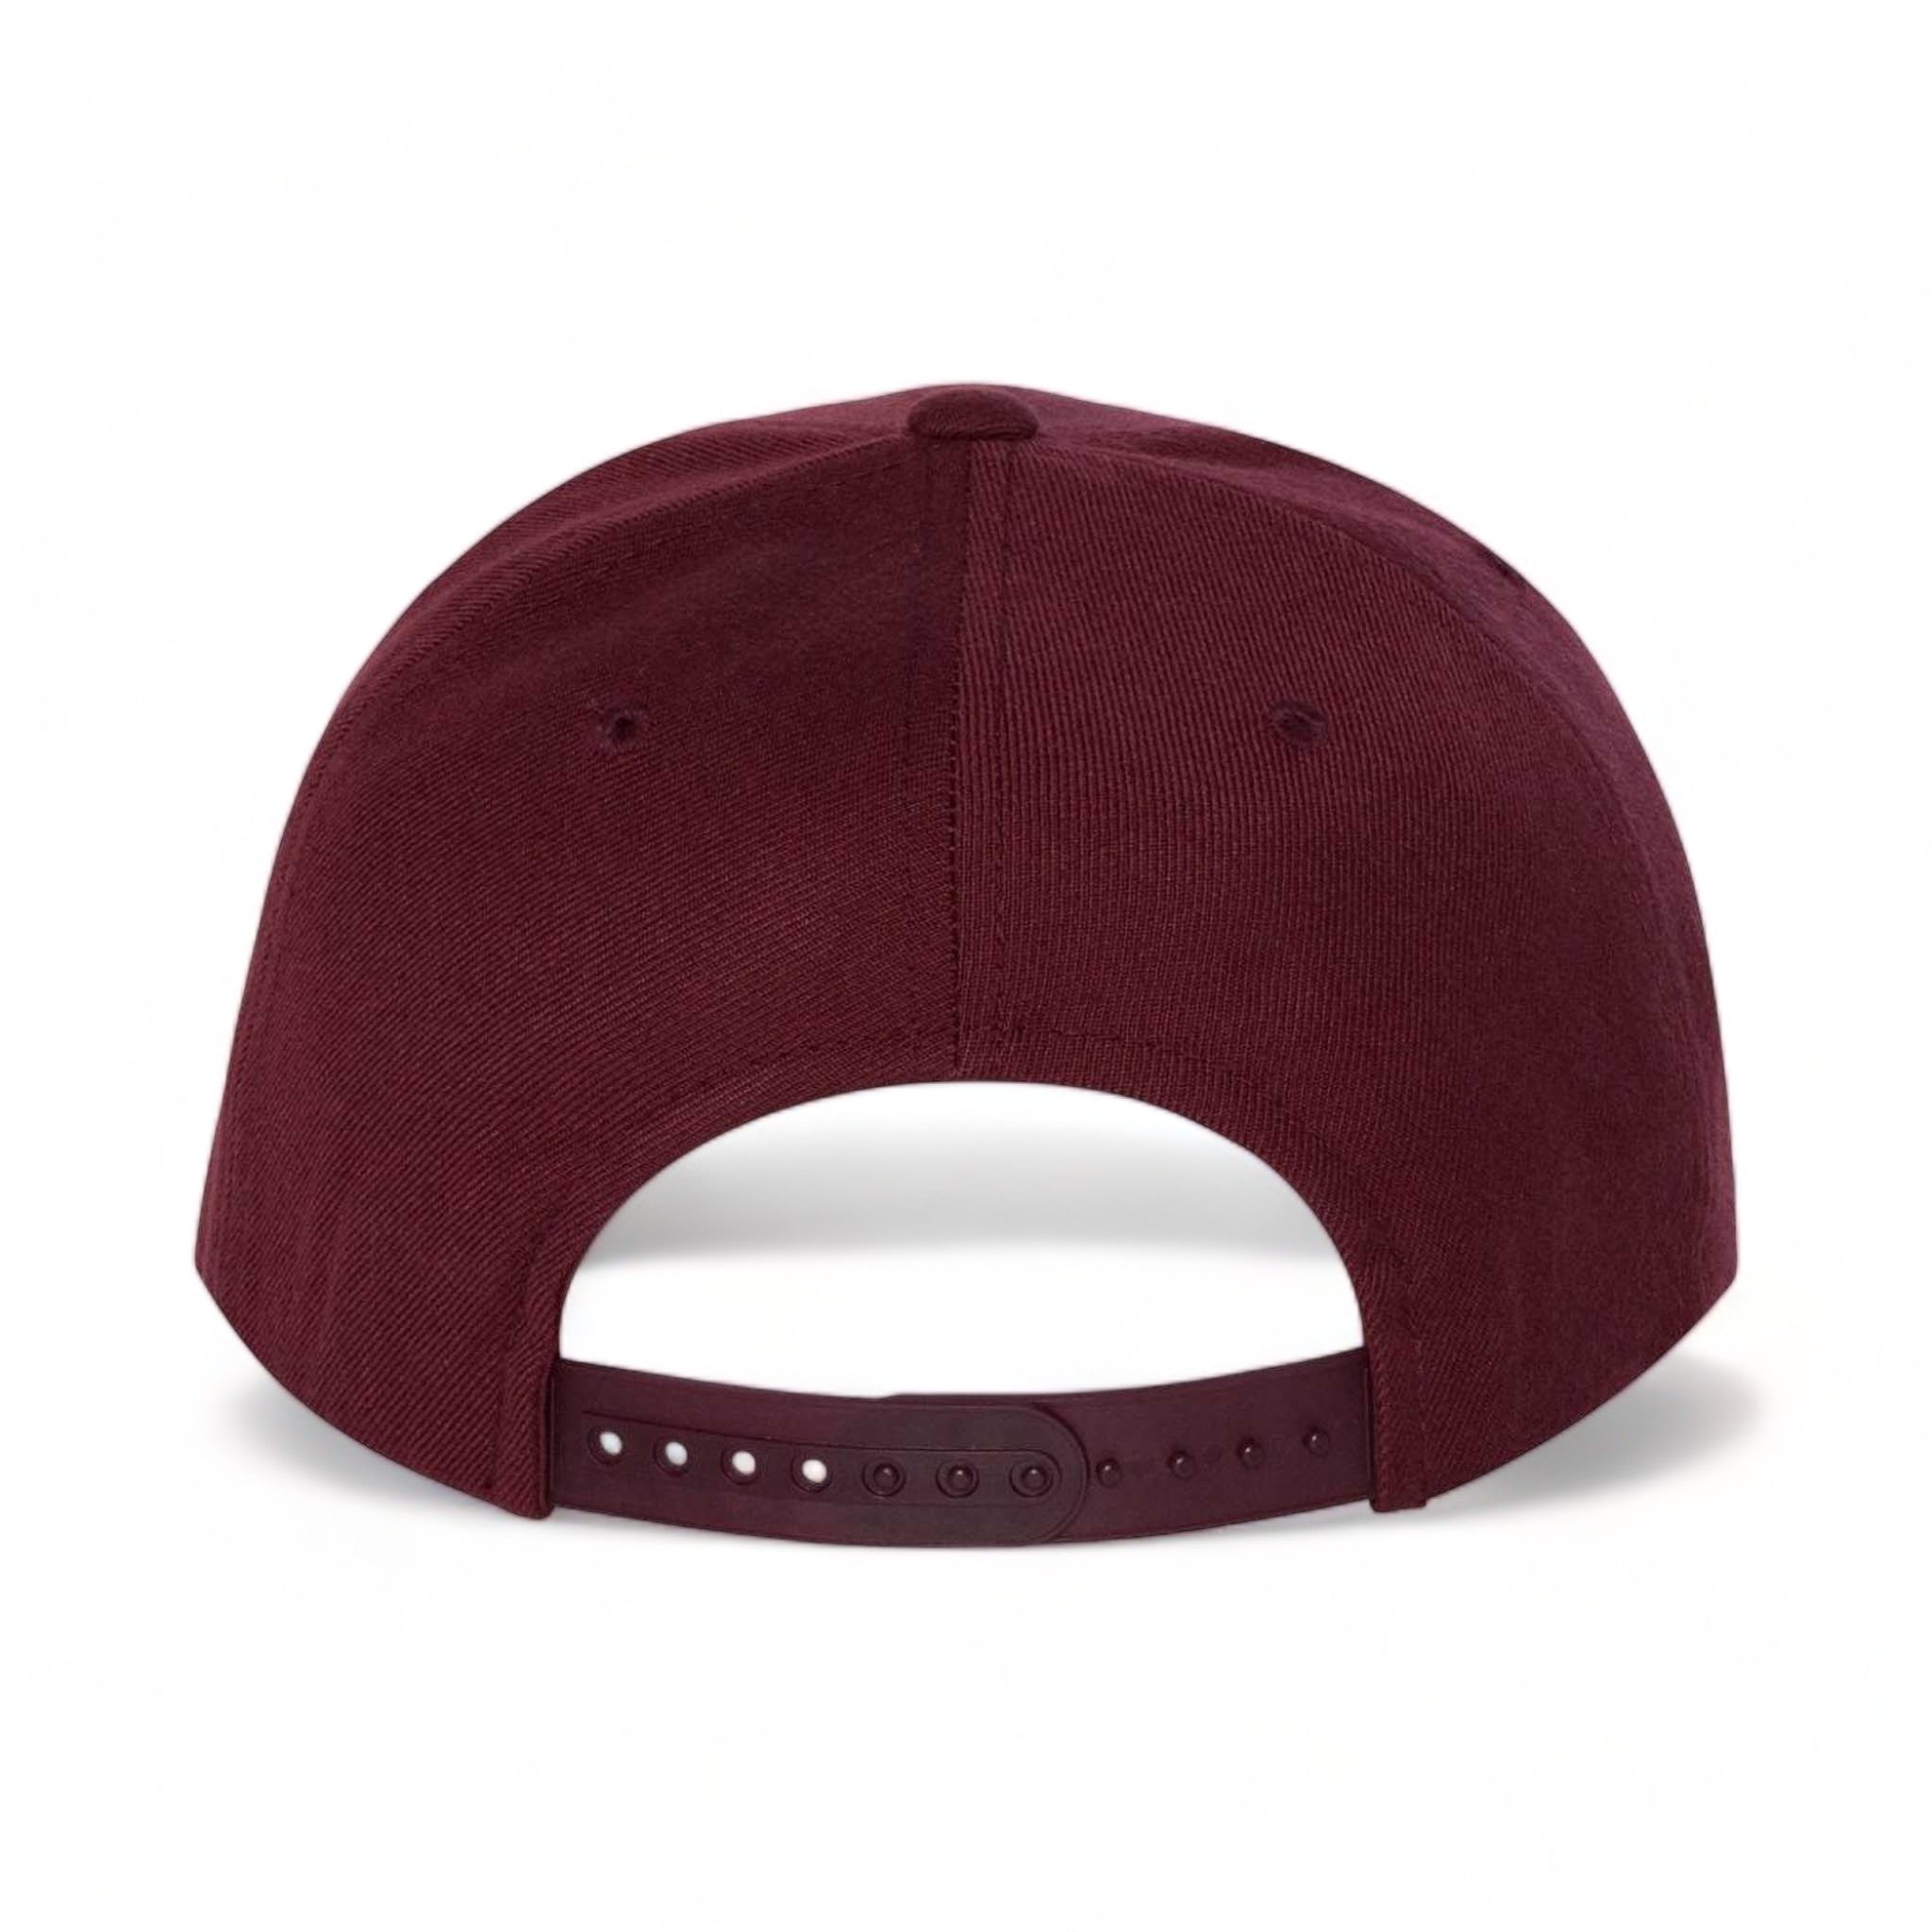 Back view of YP Classics 6089M custom hat in maroon